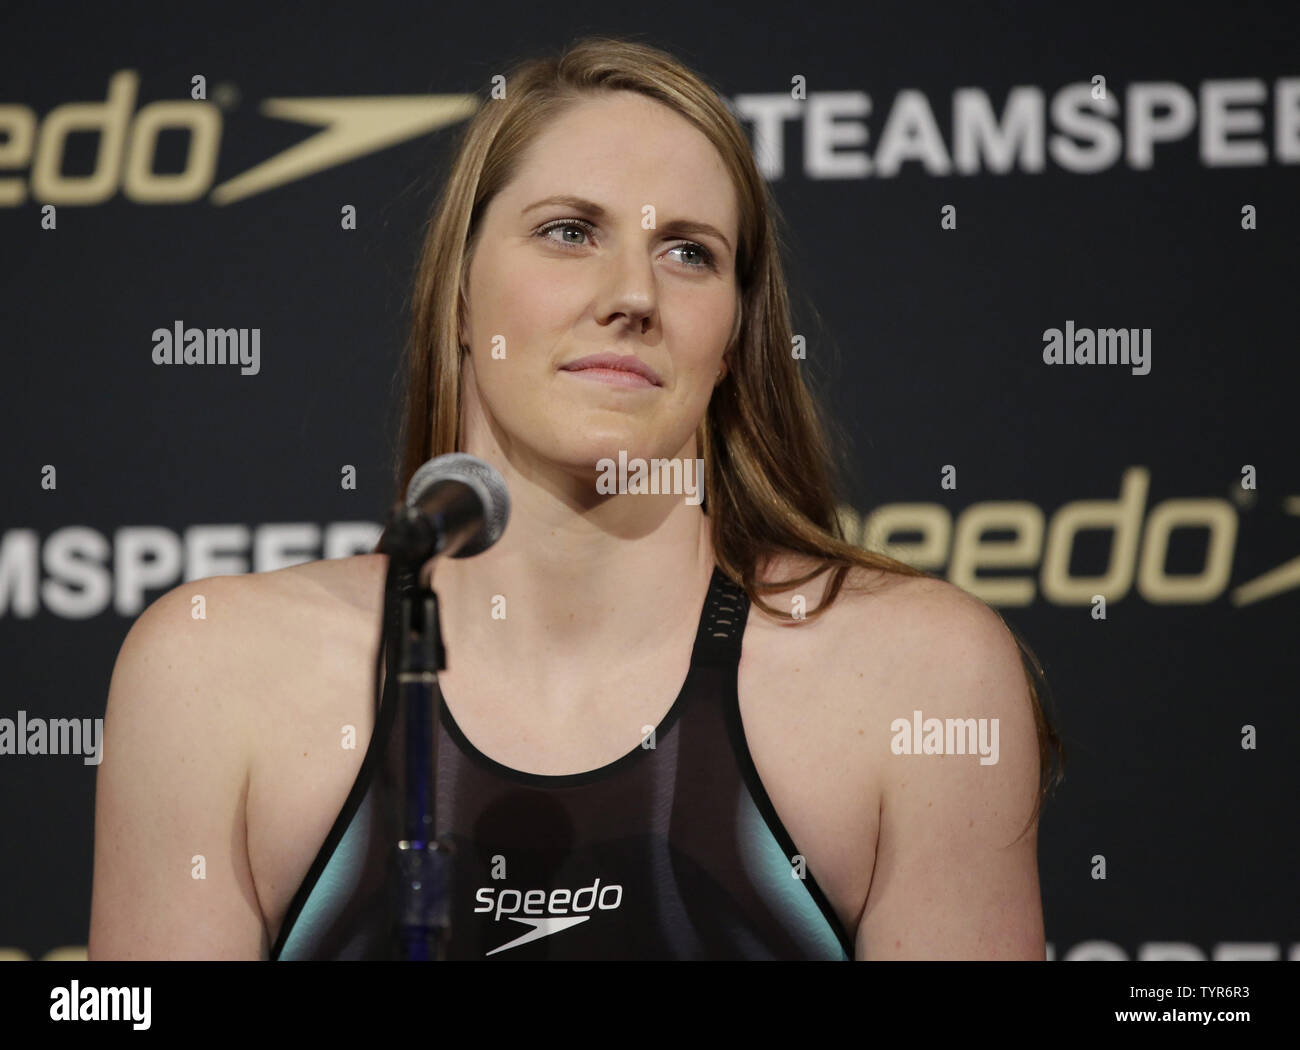 Missy Franklin answers questions after the New York launch of Team Speedo  and Speedo's Fastskin LZR Racer X in New York City on December 15, 2015.  Olympic champions Missy Franklin, Ryan Lochte